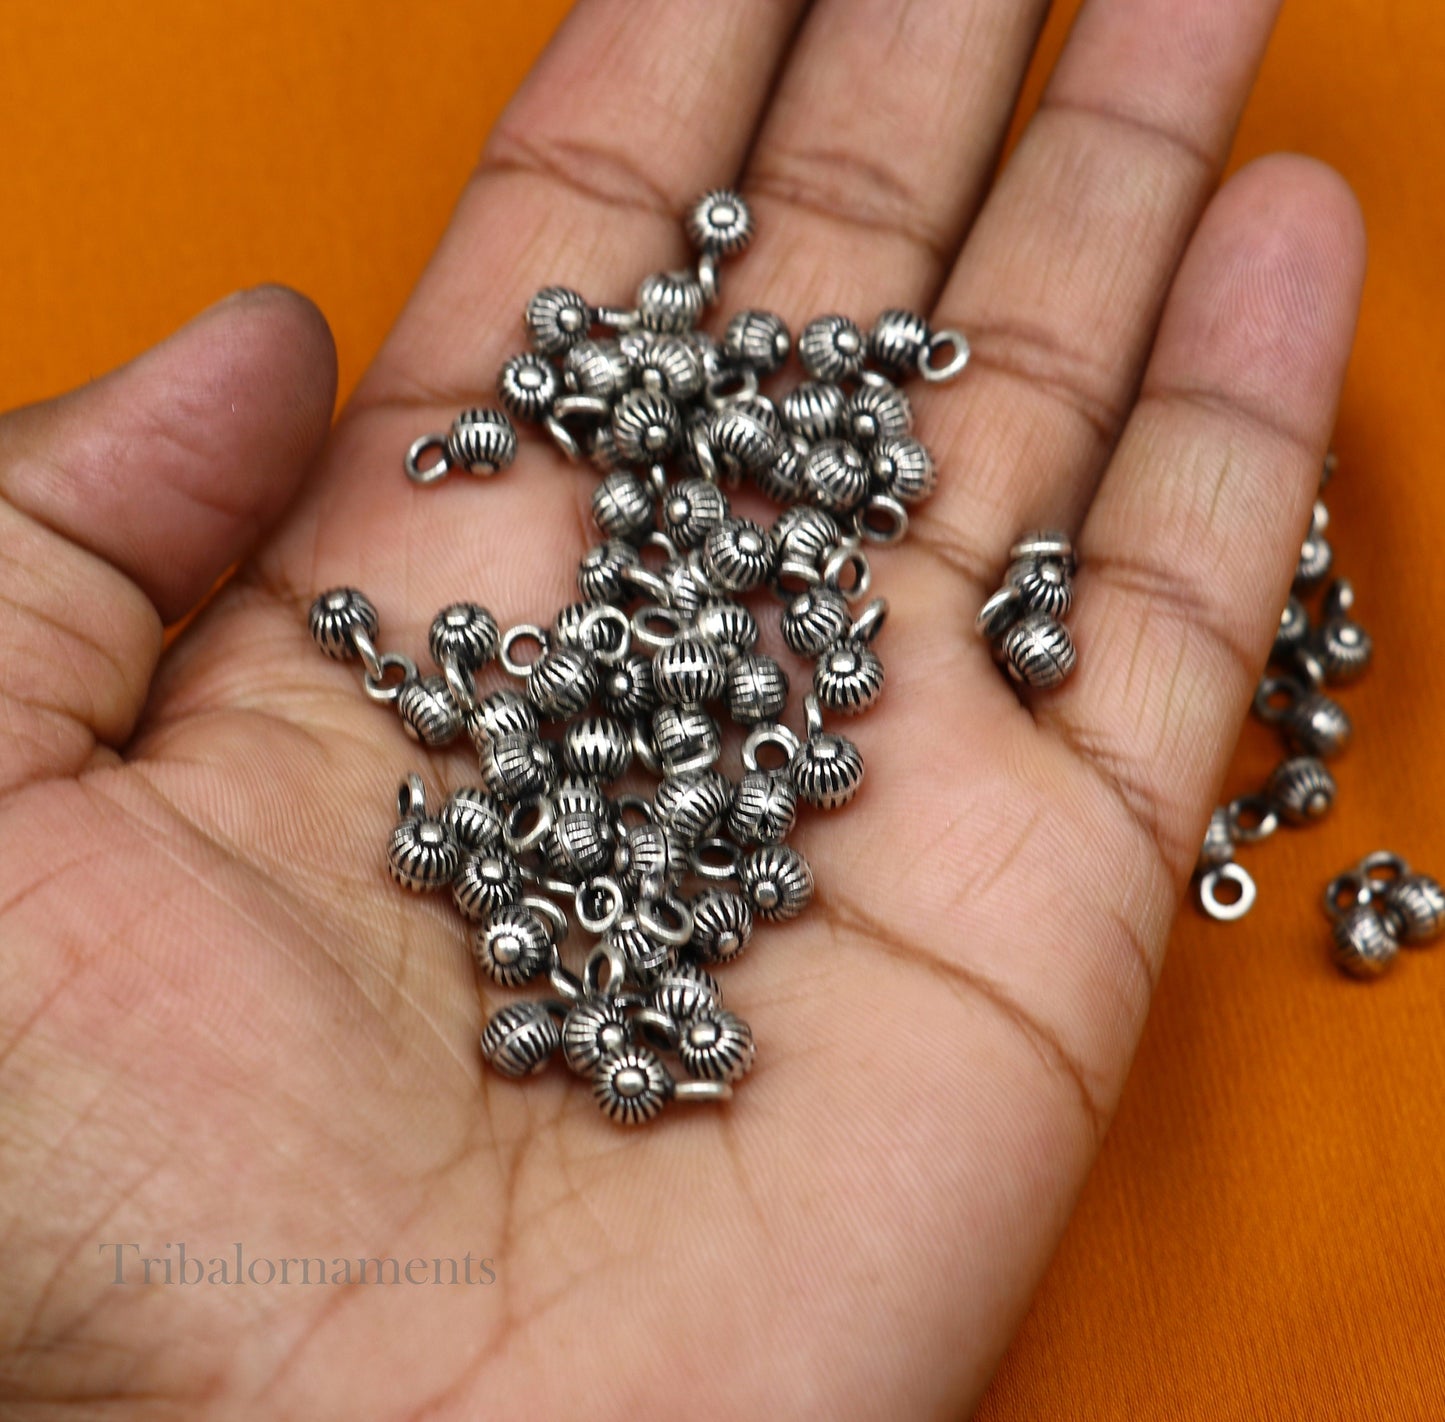 Lot 20 pieces jingling bells vintage style fabulous 925 sterling silver beads or hanging drops for custom jewelry making lose beads bd13 - TRIBAL ORNAMENTS